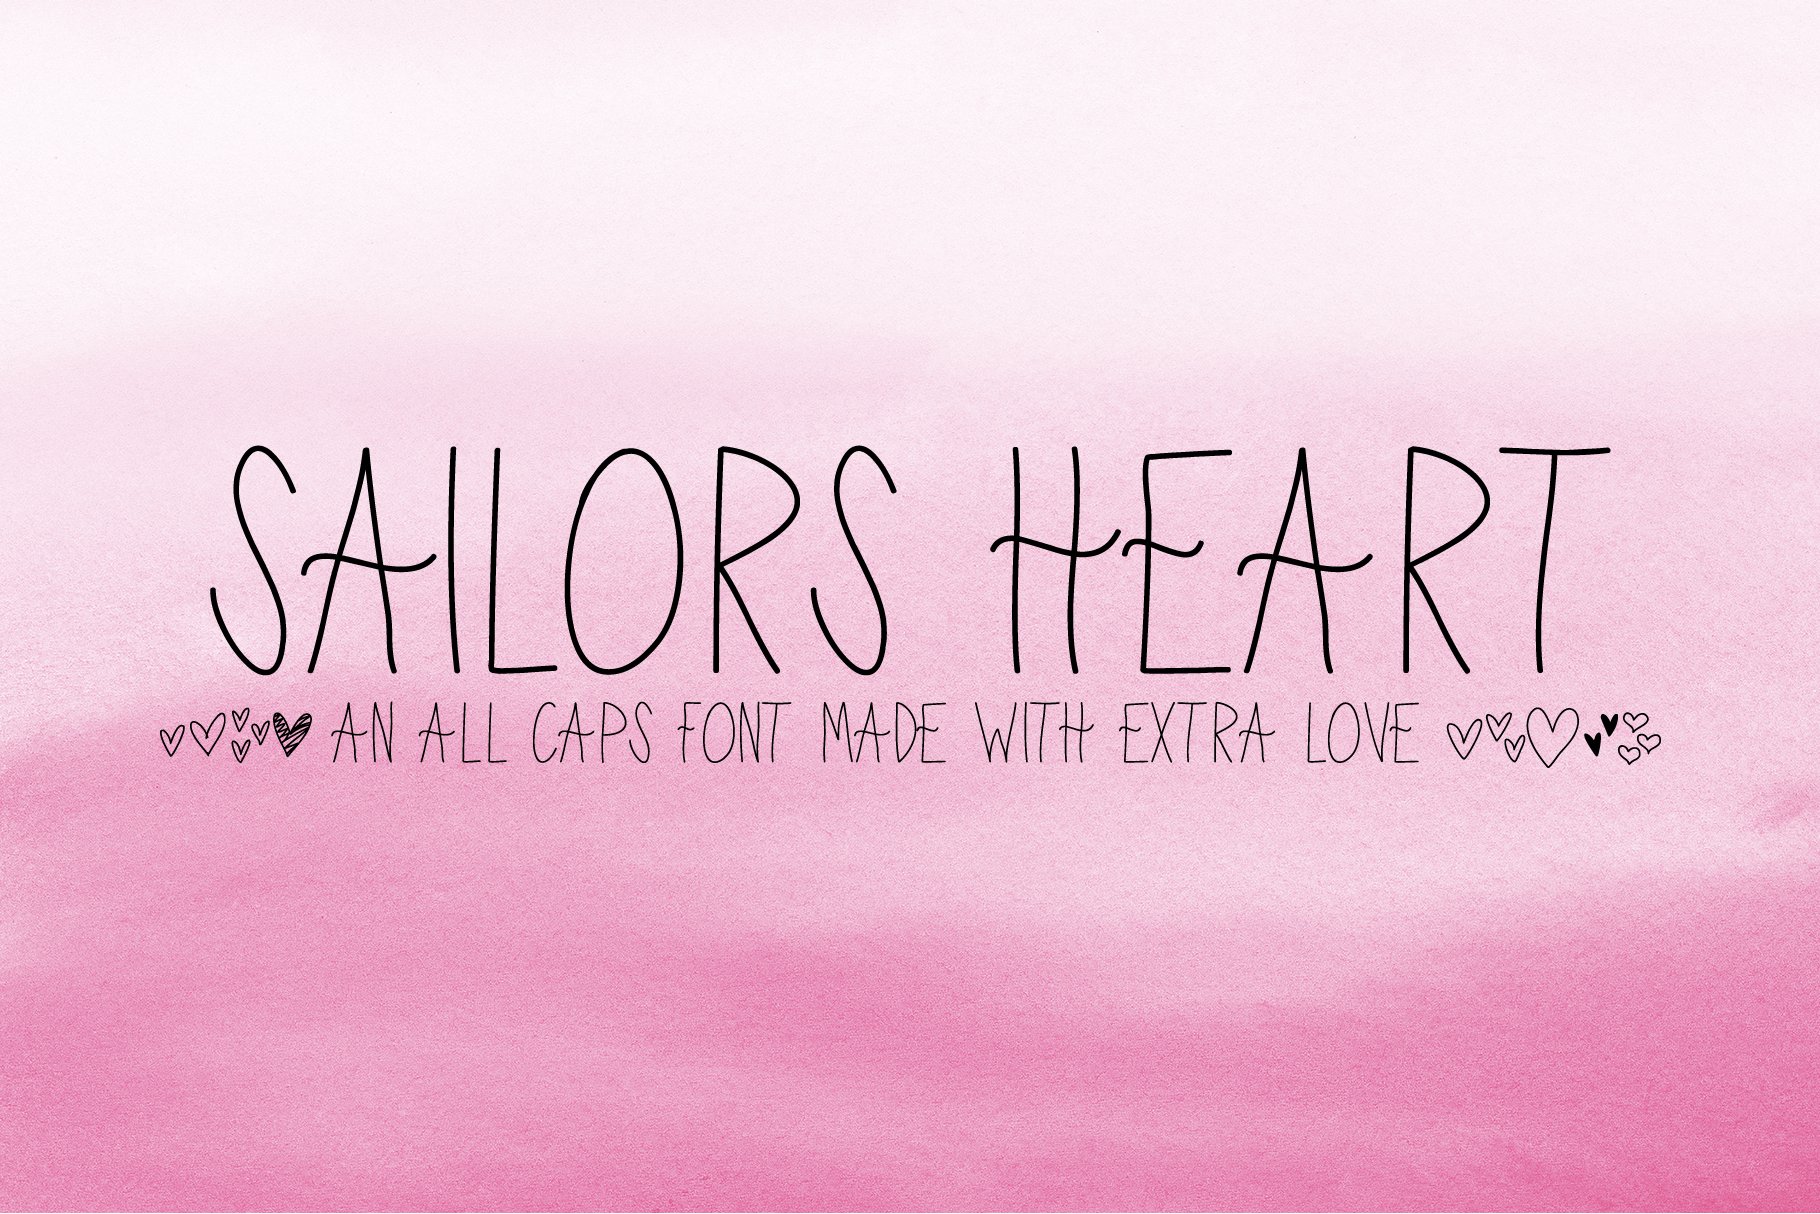 Sailor's Heart Font - Made with Love cover image.